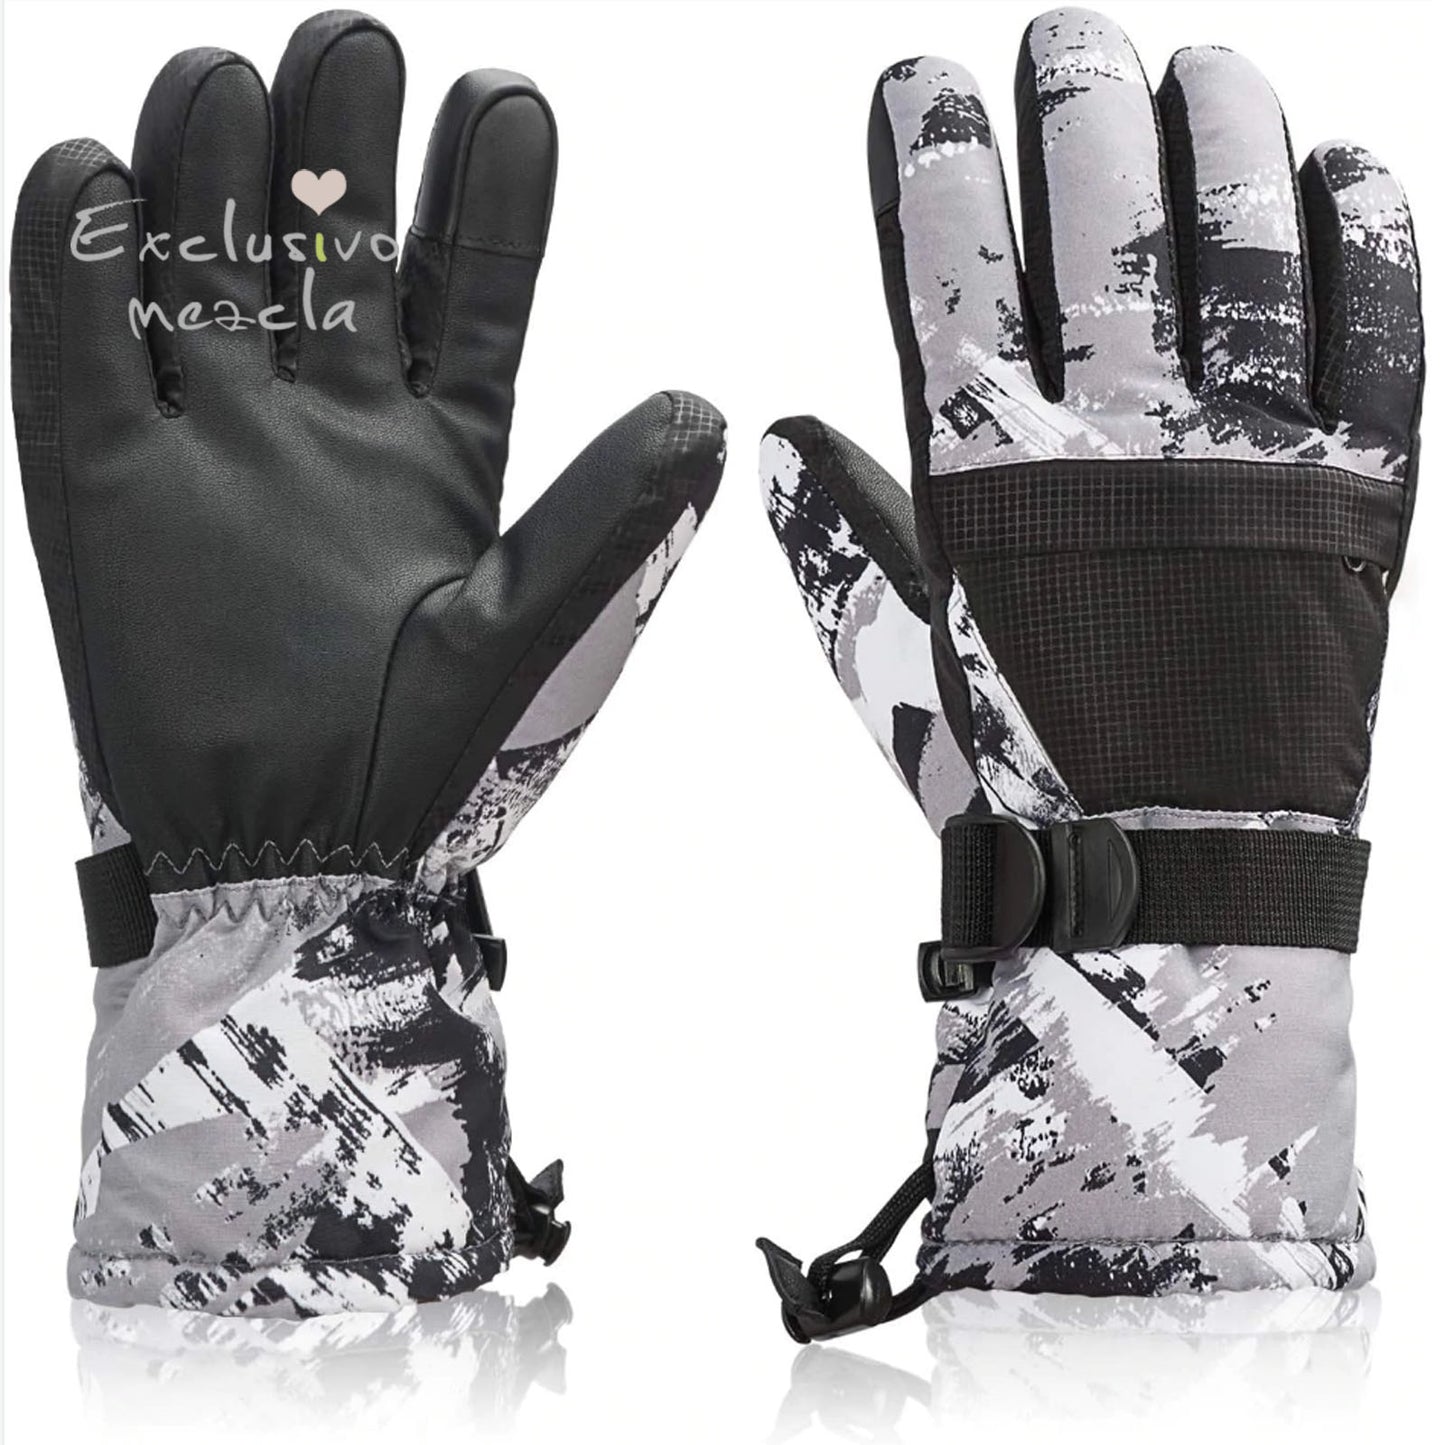 Exclusivo Mezcla Ski Snowboard Gloves, Waterproof Winter Warm Gloves, Cold Weather Touchscreen Snow Gloves for Mens, Womens, Kids Skiing,Snowboarding